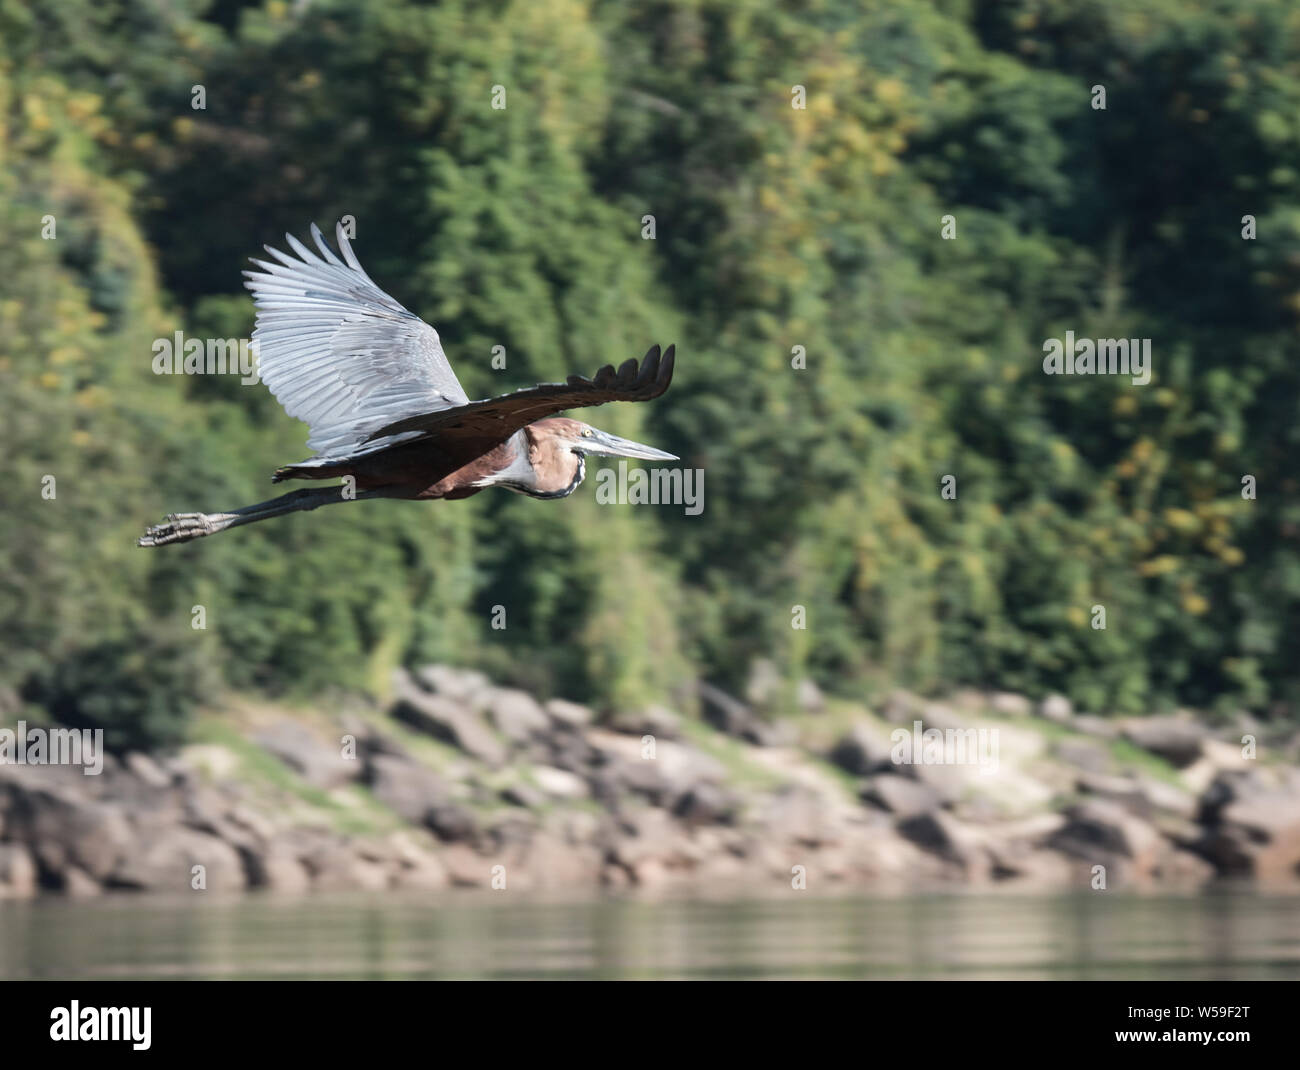 Goliath heron gliding over a river in Tanzania against a green background. Stock Photo